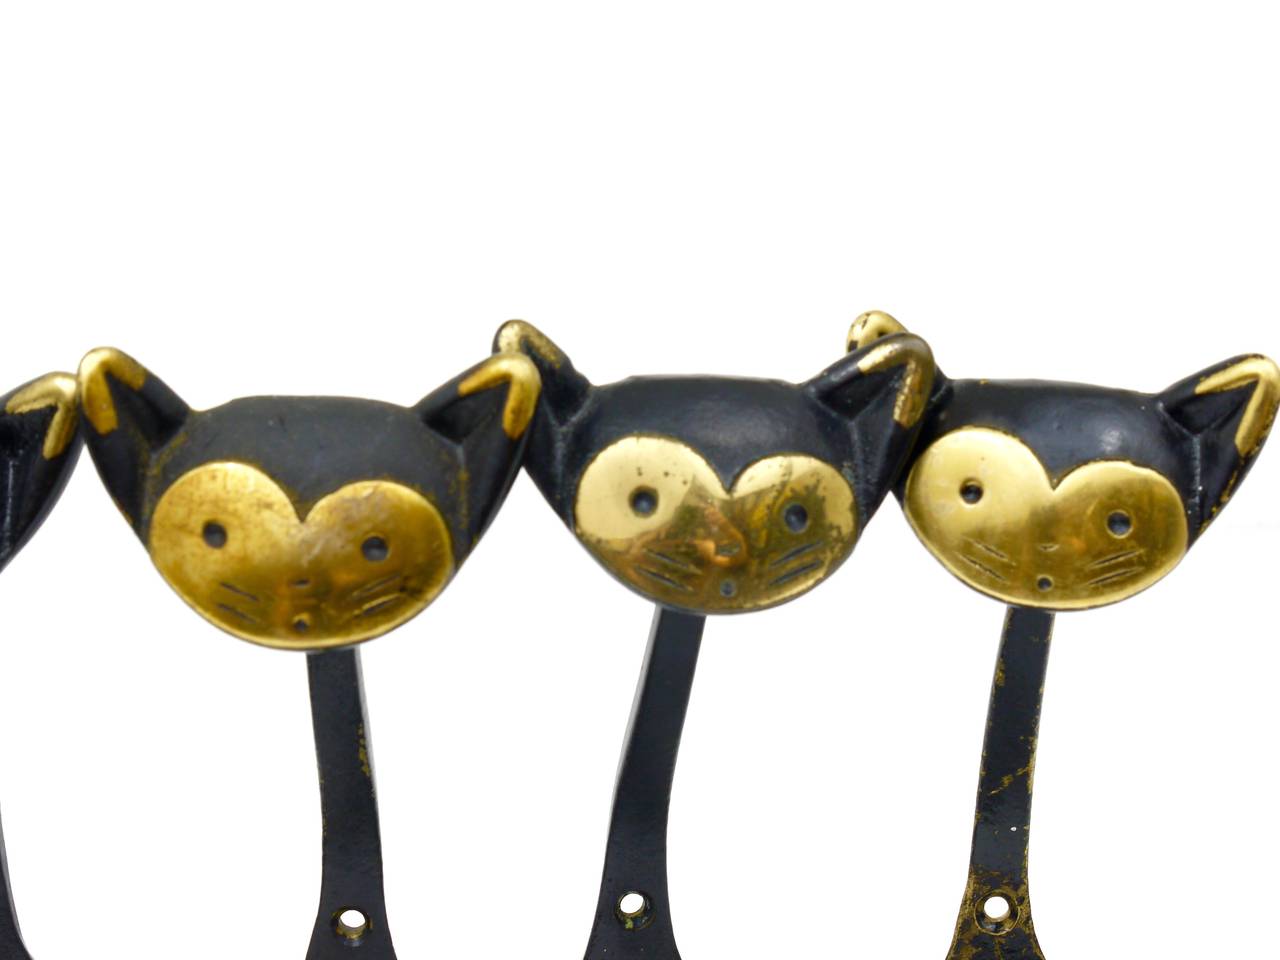 Up to eight Austrian modernist brass wall coat hooks, displaying a cat. A very humorous design by Walter Bosse, executed by Hertha Baller Austria in the 1950s. Made of black finished brass. In good condition with patina. Each hook has a height of 7